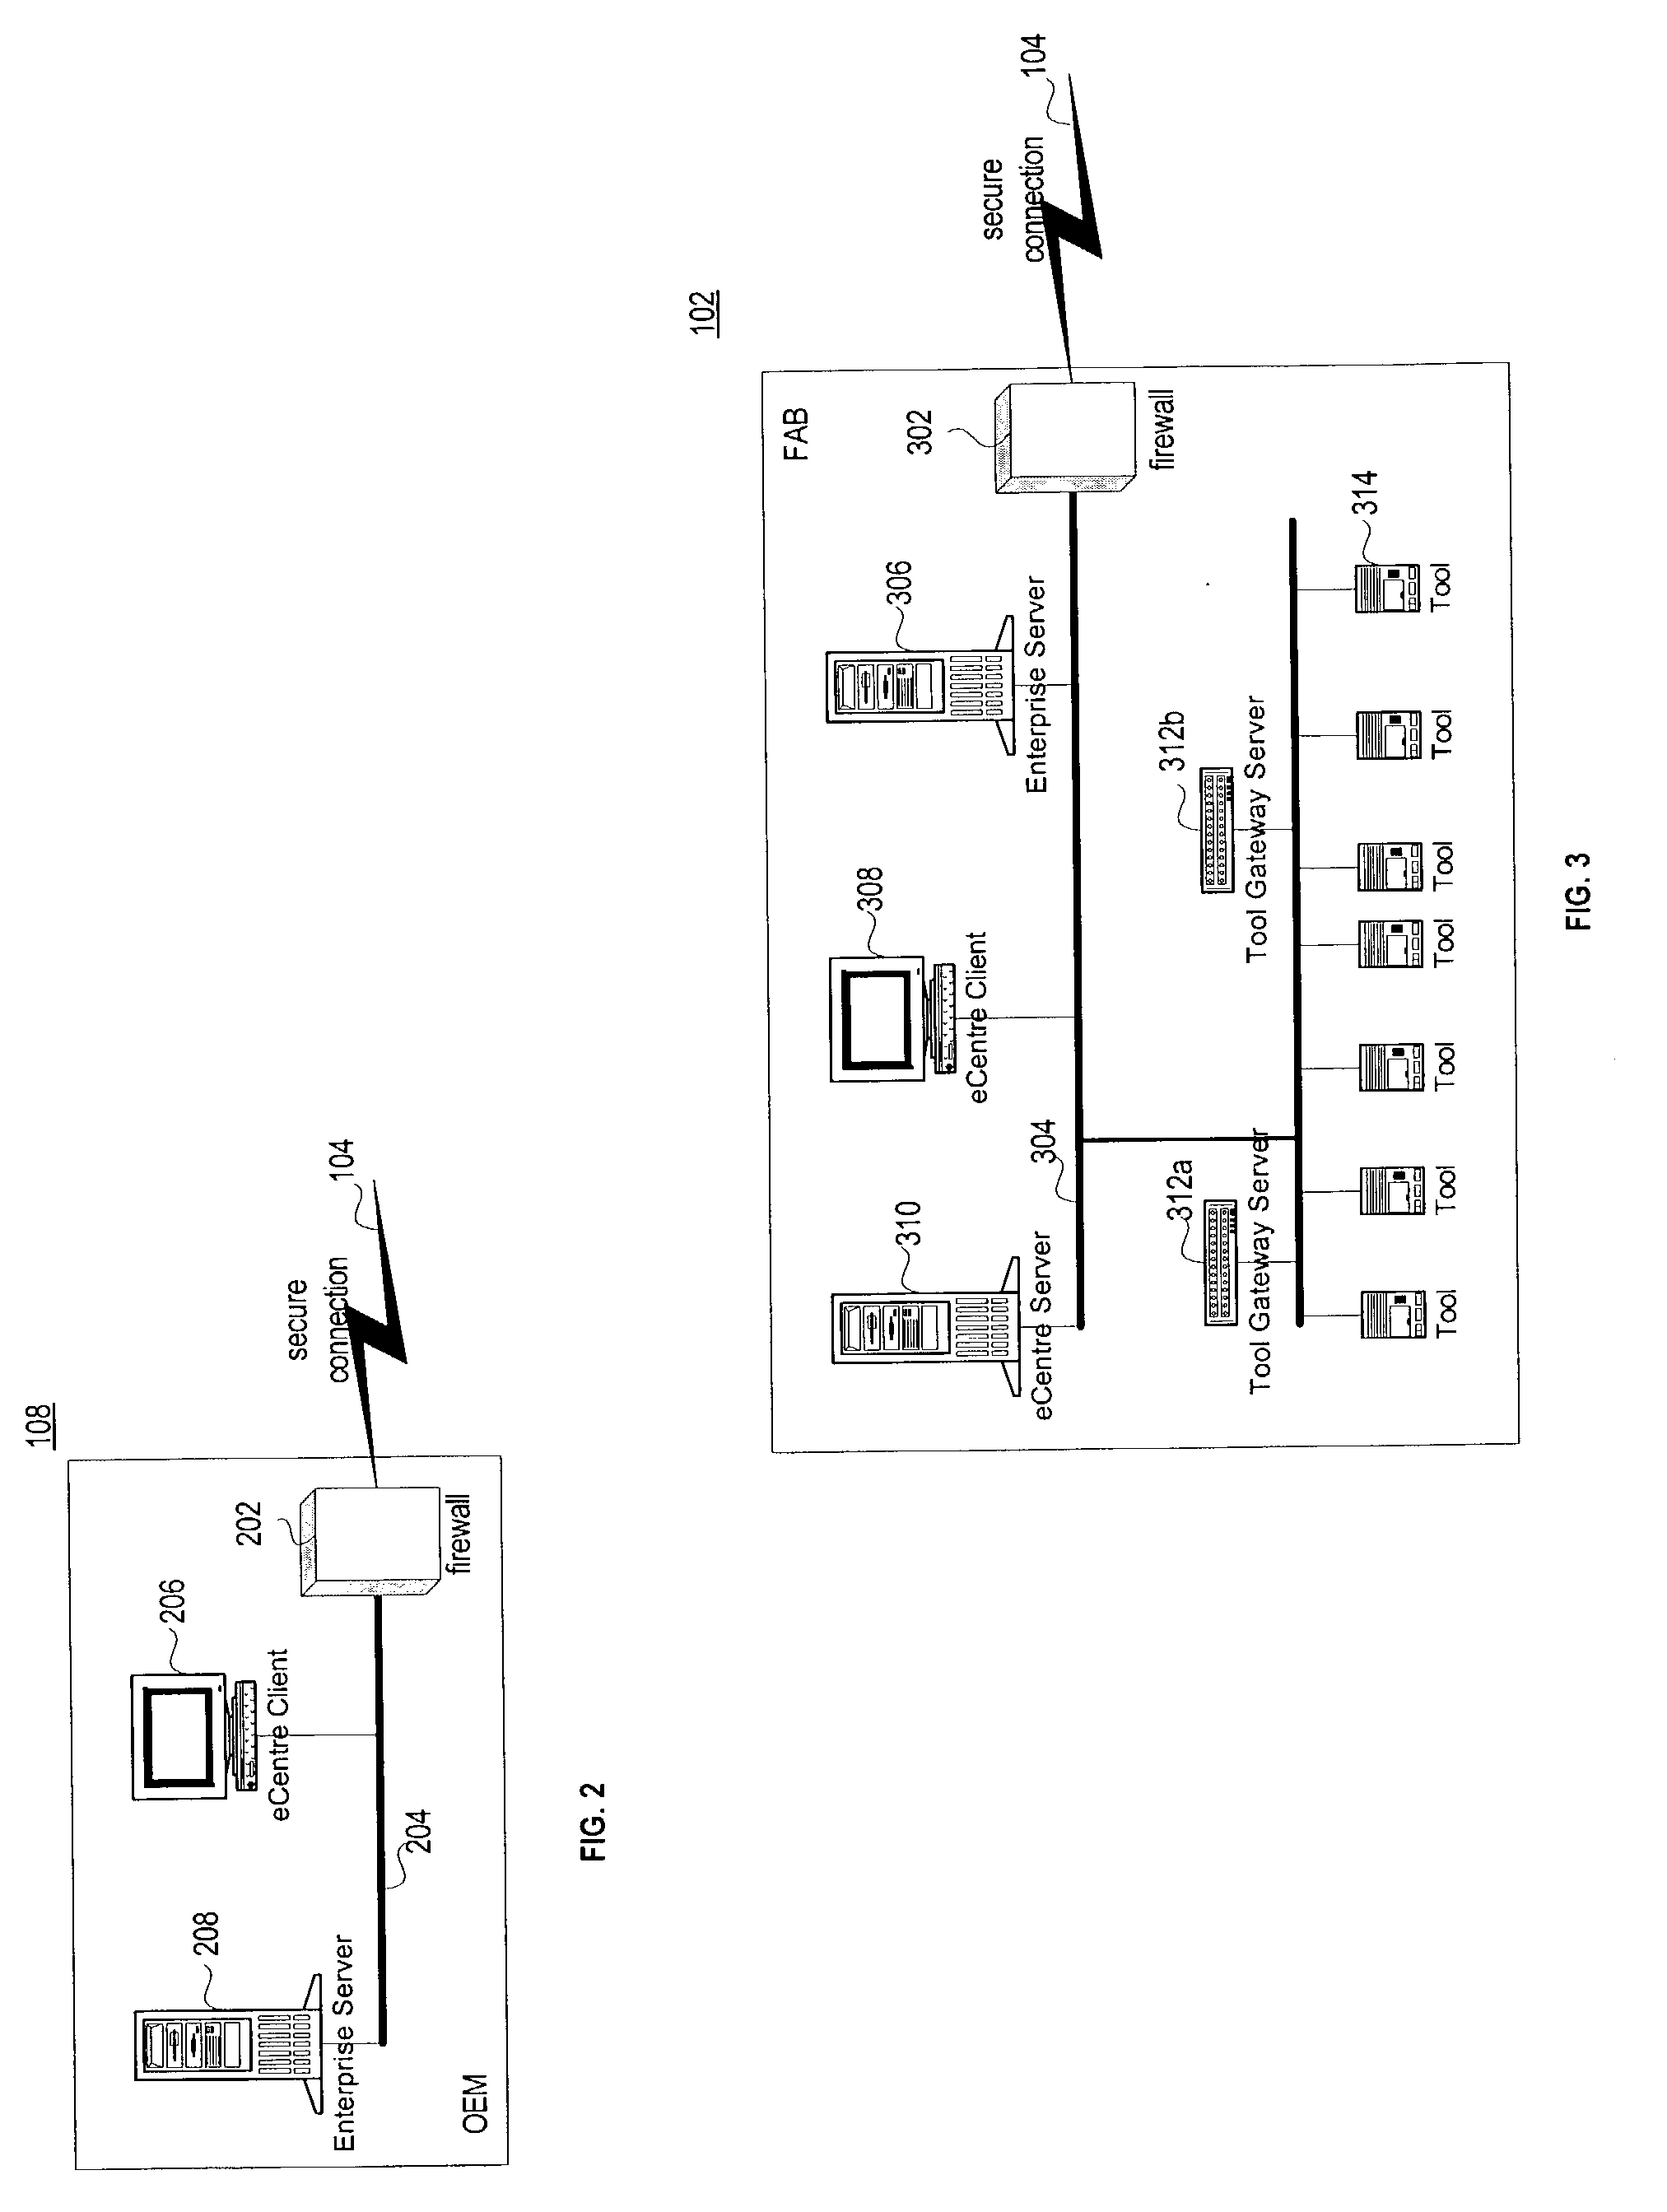 Diagnostic system and method for integrated remote tool access, data collection, and control